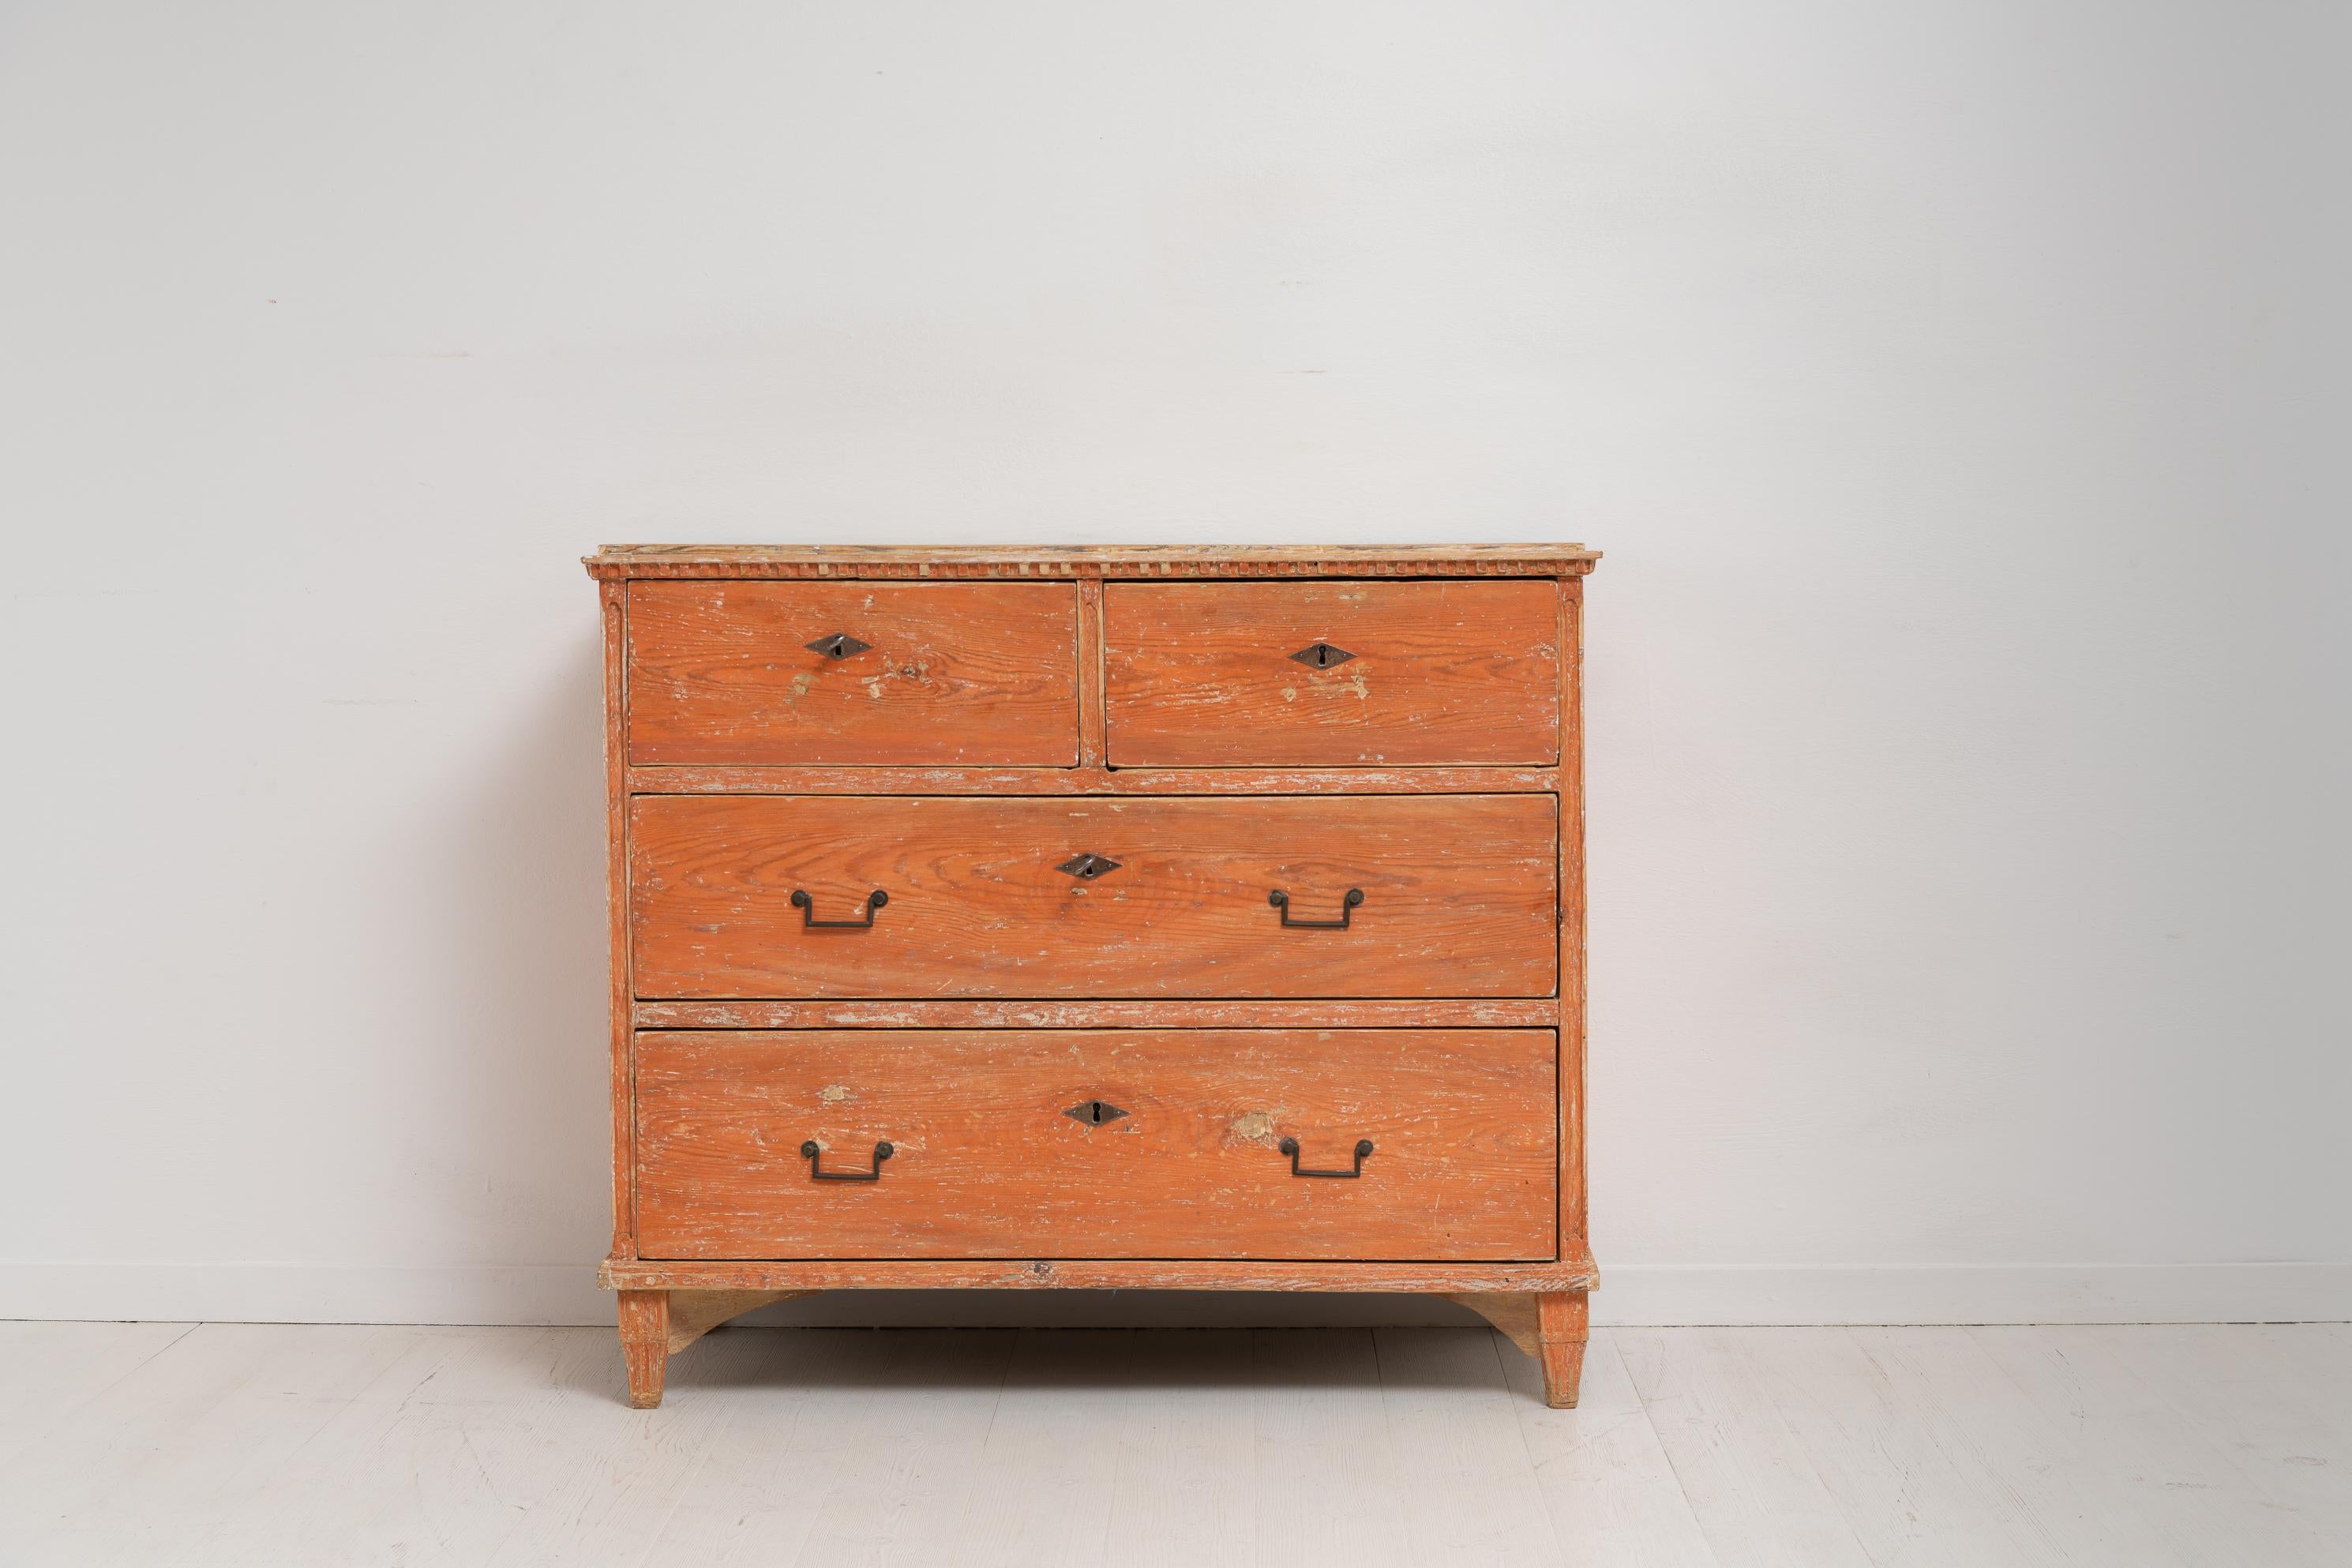 Unusual gustavian and neoclassical chest of drawers from Northern Sweden. The country home chest is from the gustavian, or as it’s also known, the neoclassical period and dates to the years between 1790 to 1800. Painted pine scraped by hand to the